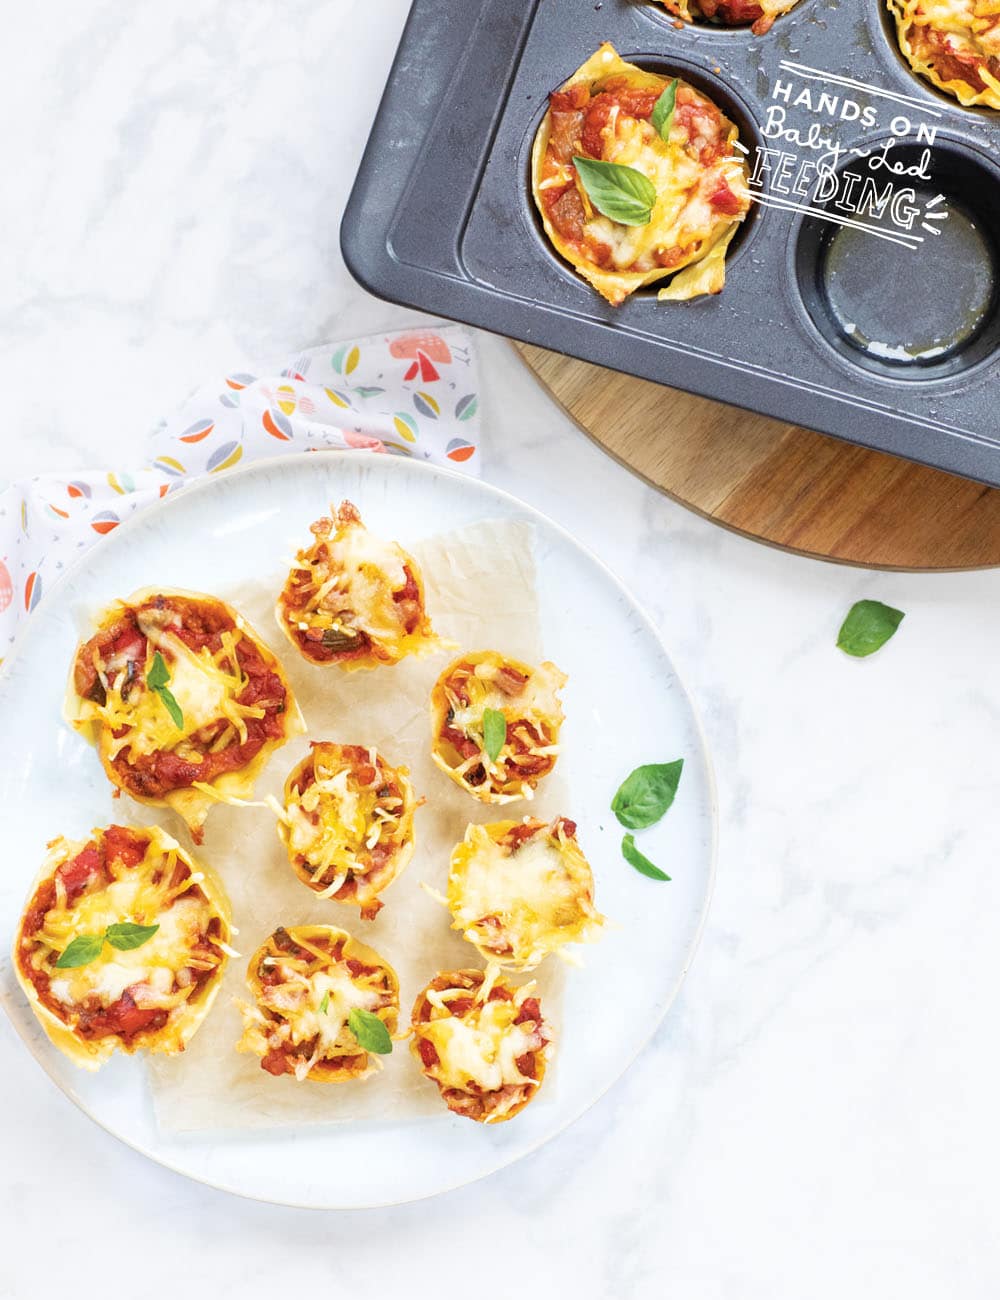 Dairy Free Lasagna recipe for baby led weaning. Healthy finger food for babies 6 months old or older. Egg-free, dairy-free, and Vegan dinner recipe. #veganrecipe #babyledweaning #dairyfree #eggfree #plantbased #fingerfood